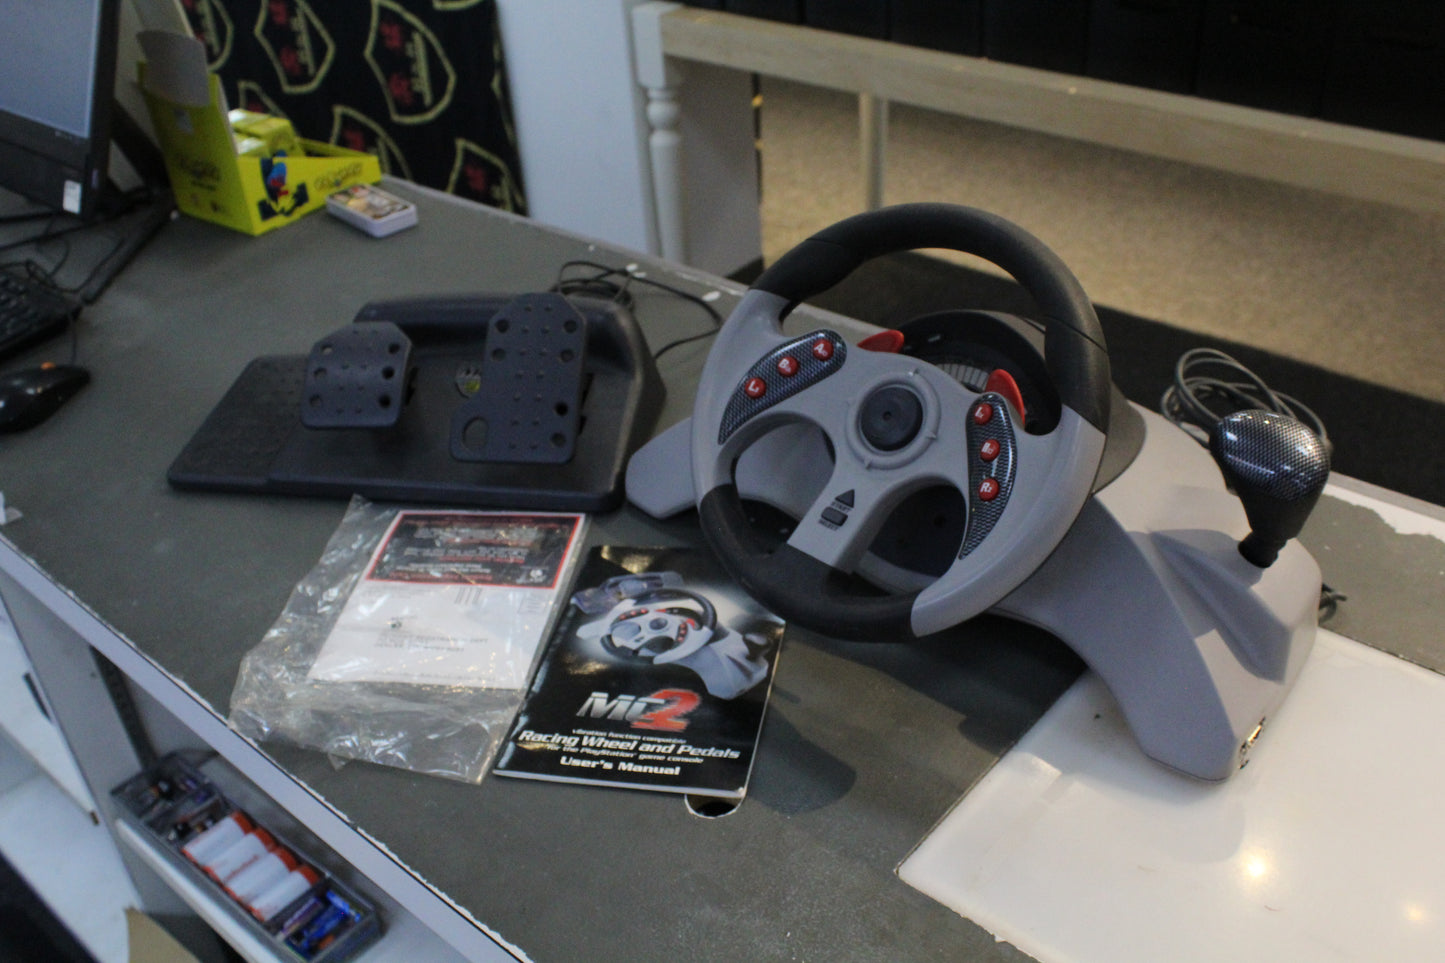 Mad Catz MC2 Racing Wheel And Pedals For the PlayStation One (in box) LOCAL PICK UP ONLY